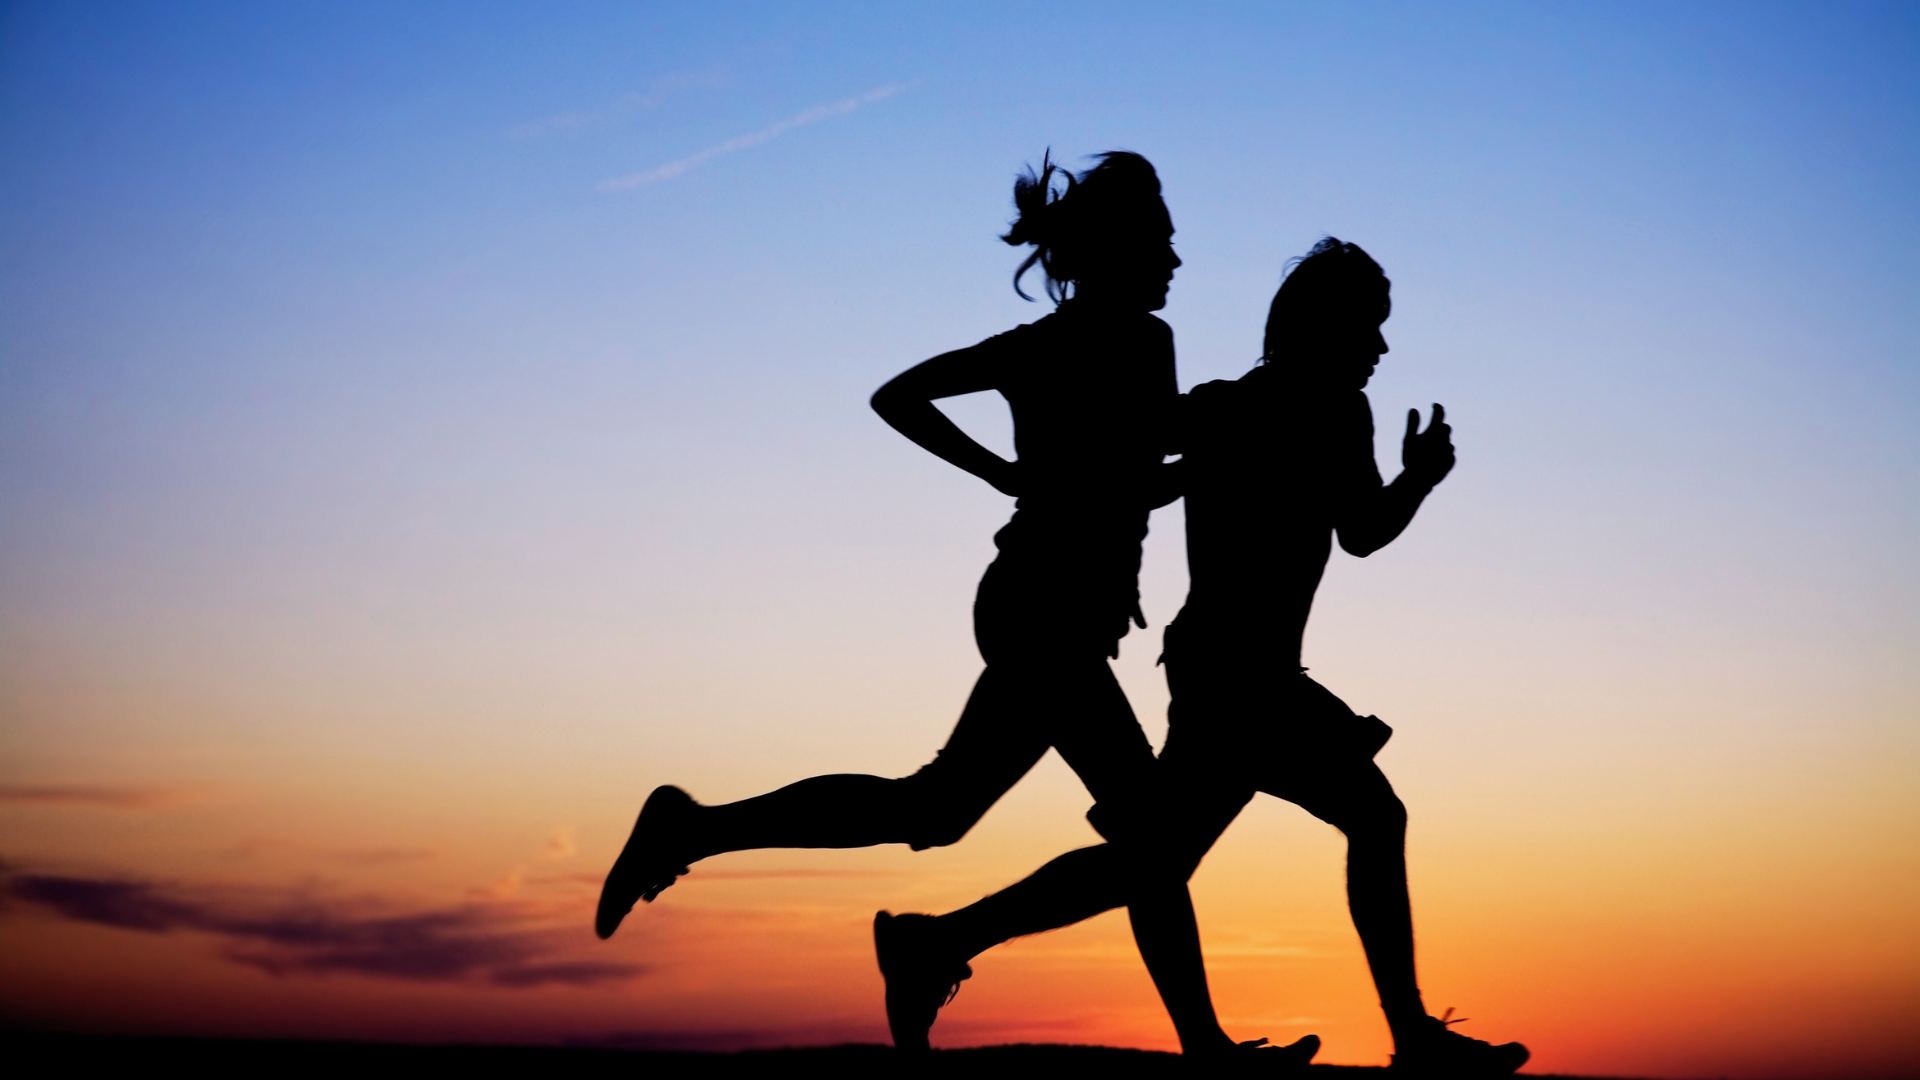 Silhouette of two runners